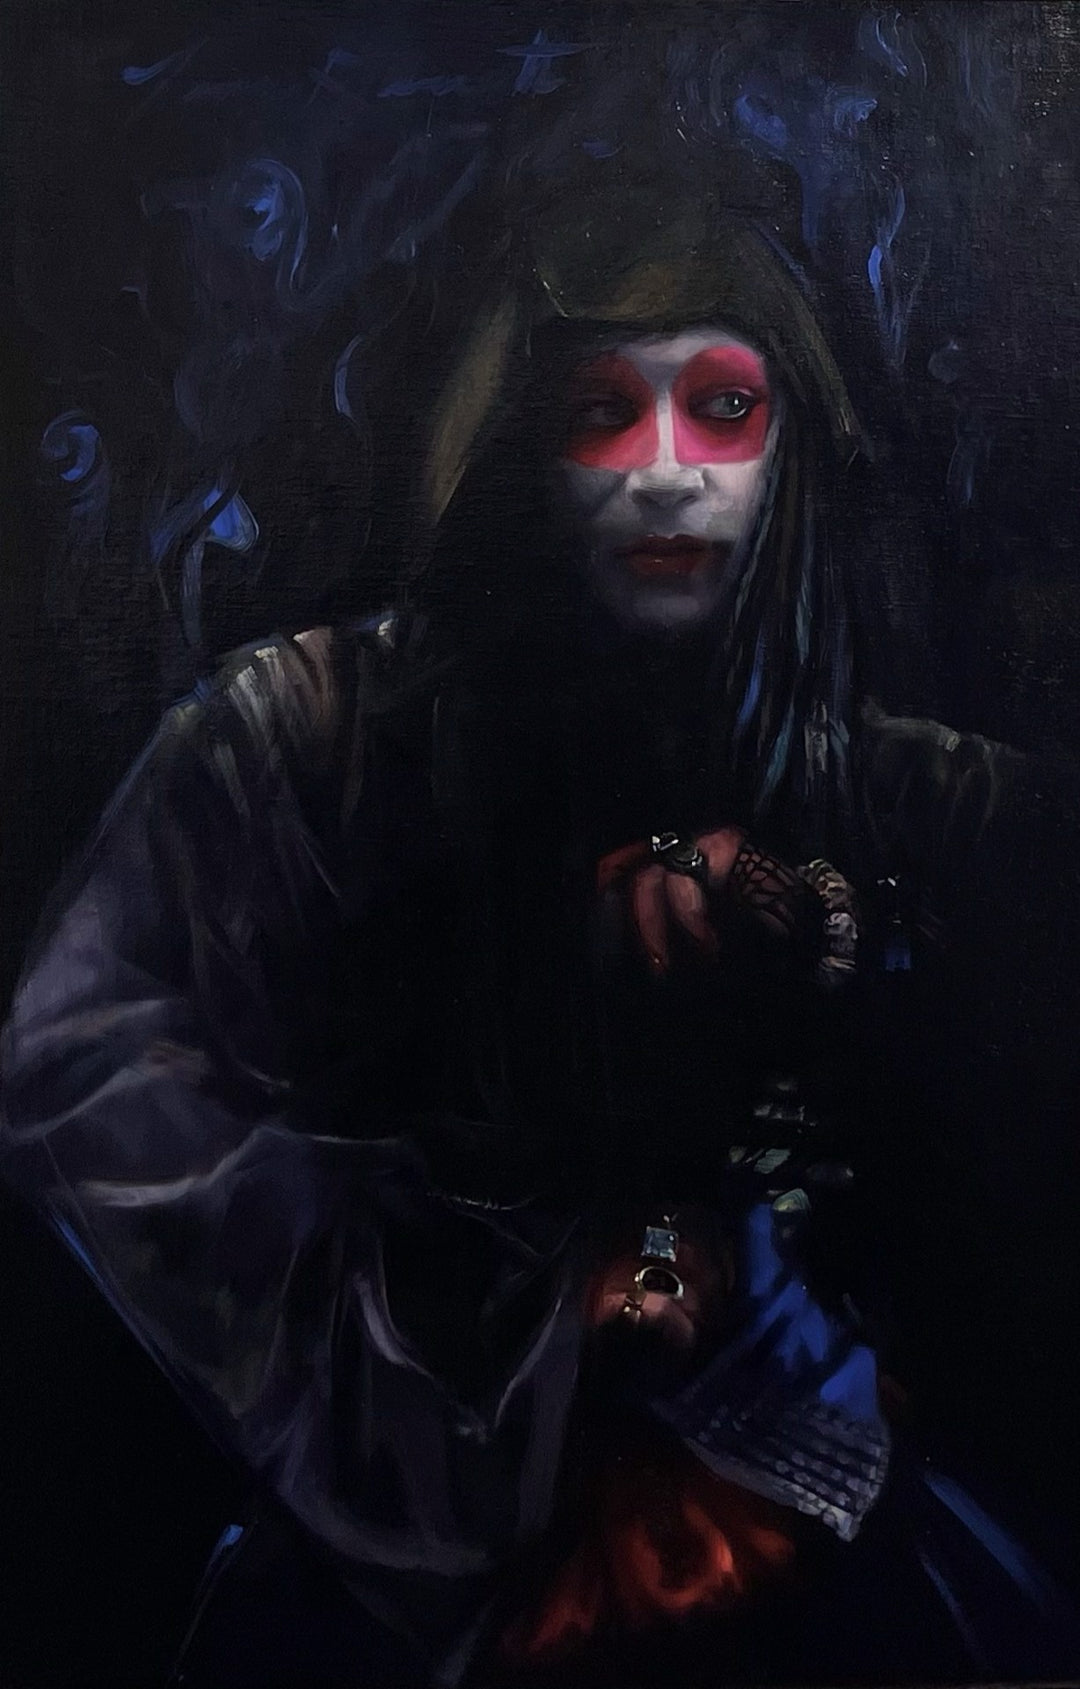 A Tina Garrett - "Magique Noir" painting, depicting a woman with red eyes and black hair, created using oil on board.